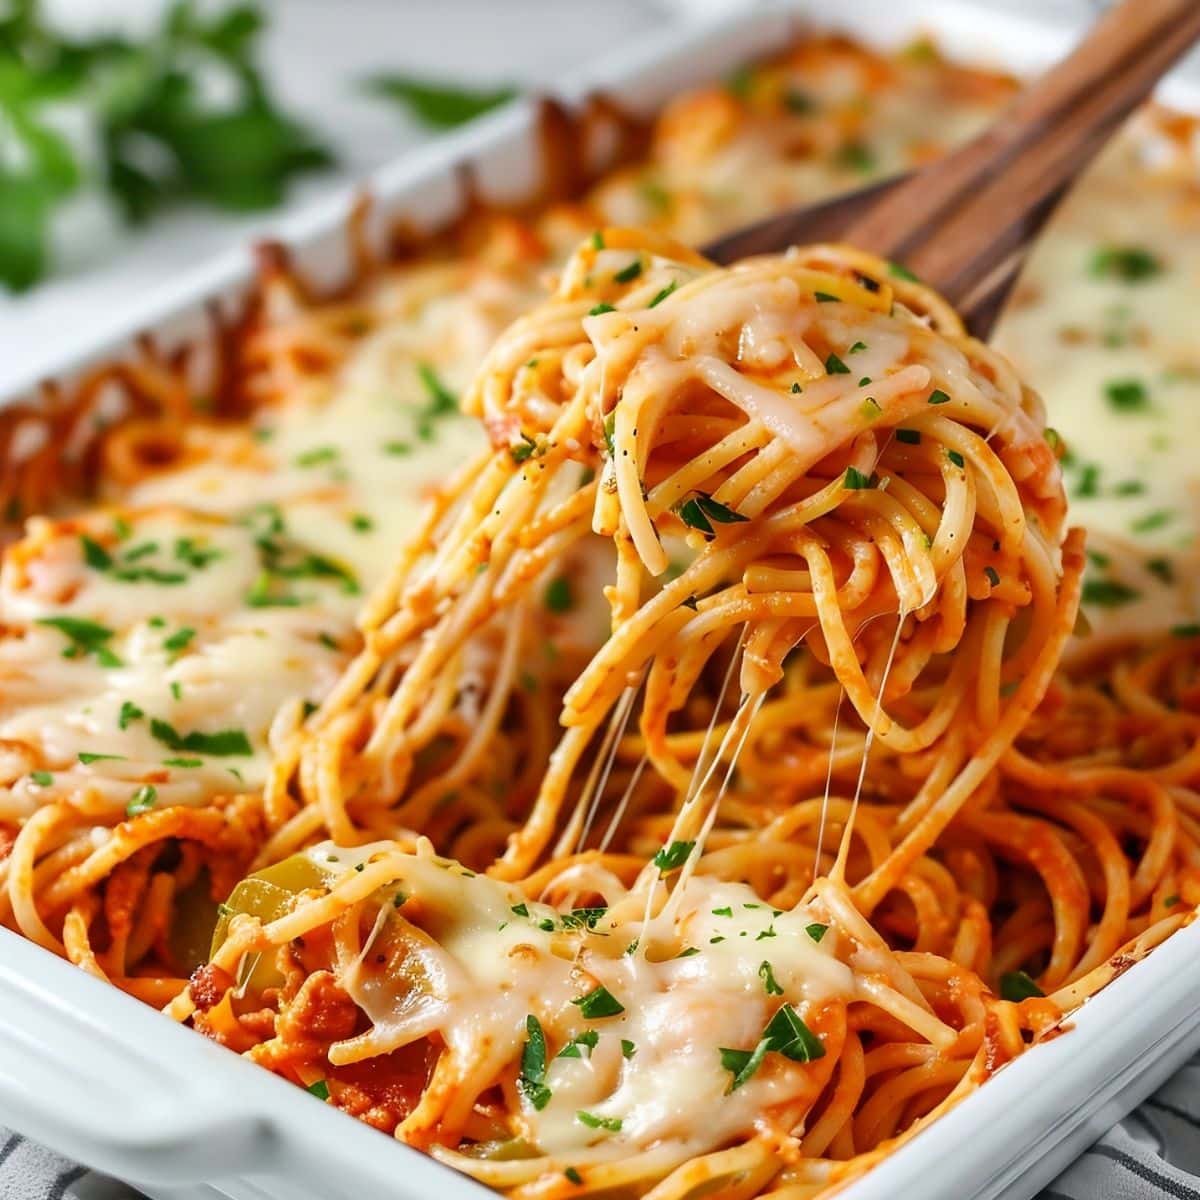 Wooden ladle lifting baked cream cheese spaghetti from a baking dish.